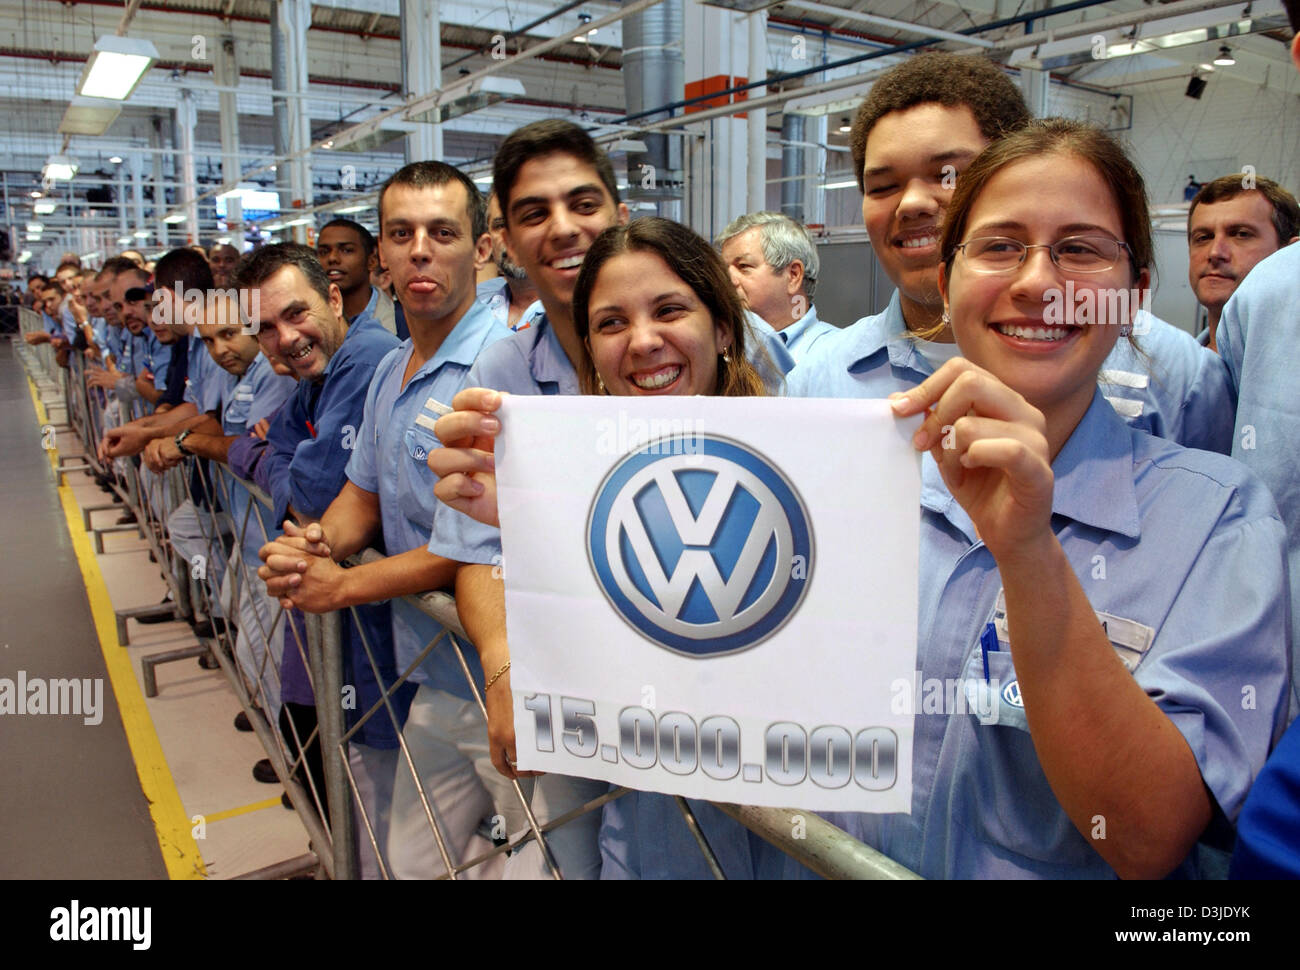 (dpa) - Employees of Volkswagen do Brasil smile and present a VW-logo during a celebration festivity of VW do Brasil at the factory site in Anchieta close to Sao Paulo, Brazil, 3 May 2005. VW celebrates the production of more than 15 million vehicles in over 50 years in Brazil. Stock Photo